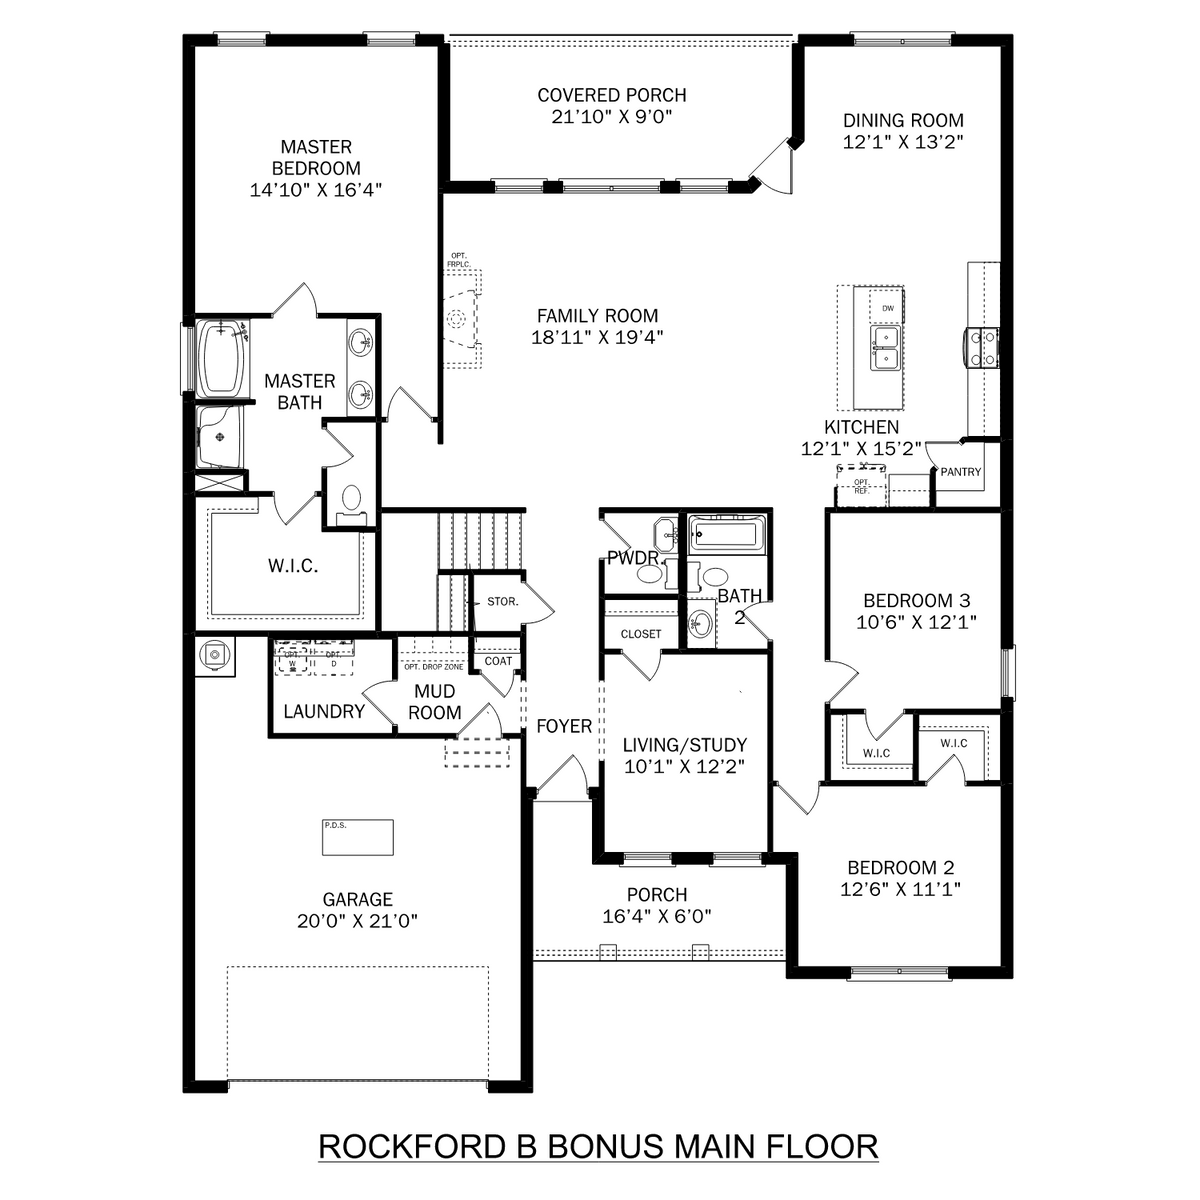 1 - The Rockford B with Bonus floor plan layout for 119 Scout Drive in Davidson Homes' Barnett's Crossing community.